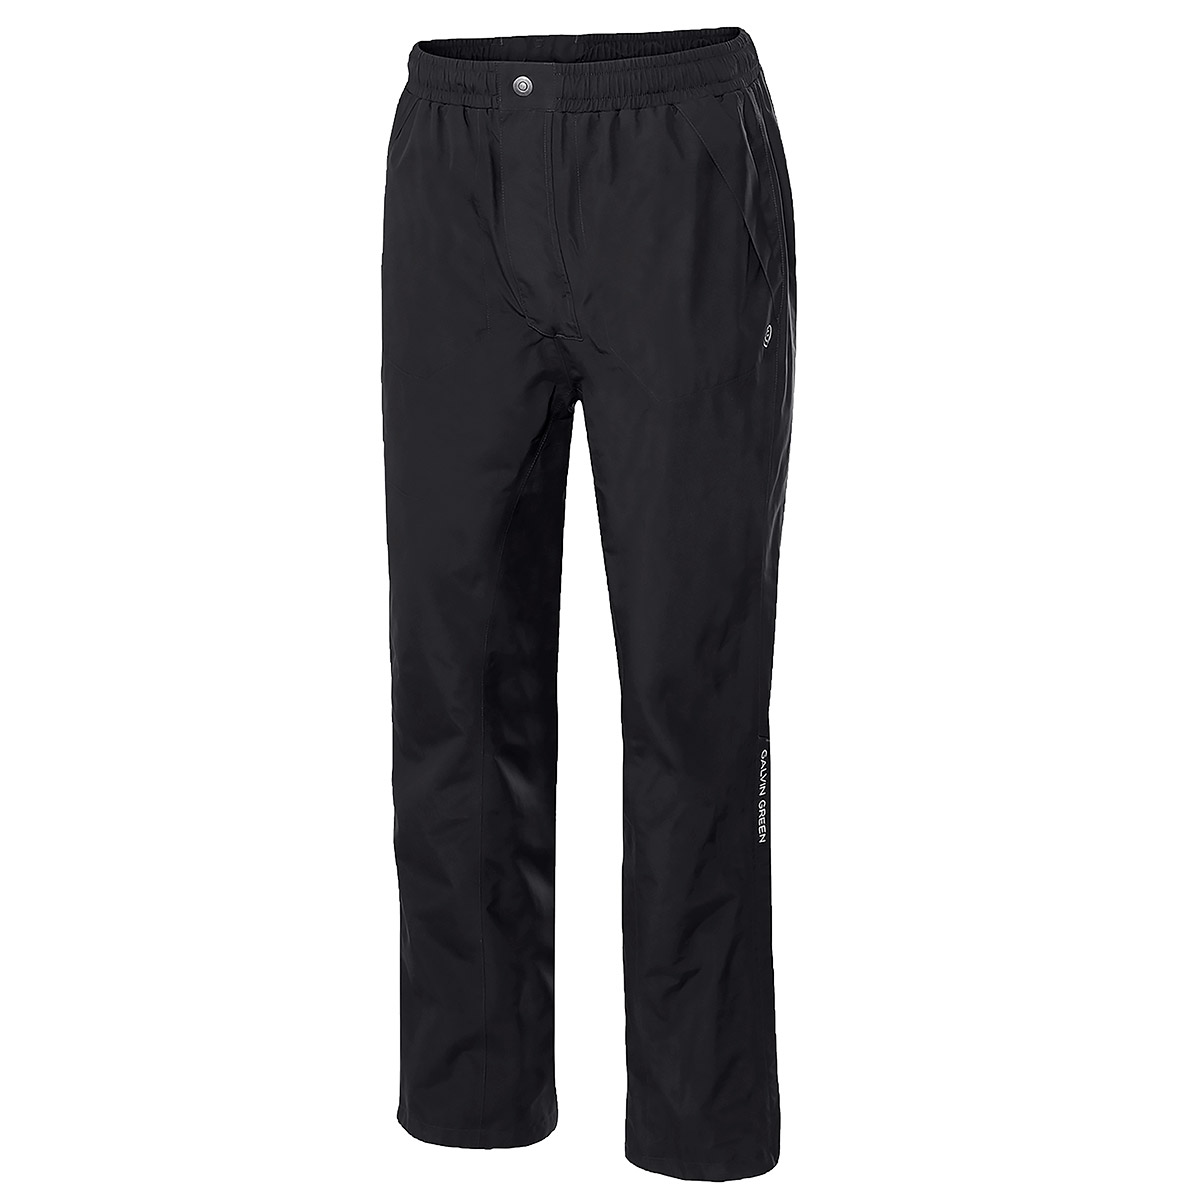 Galvin Green Andy GORE-TEX Waterproof Trousers from american golf